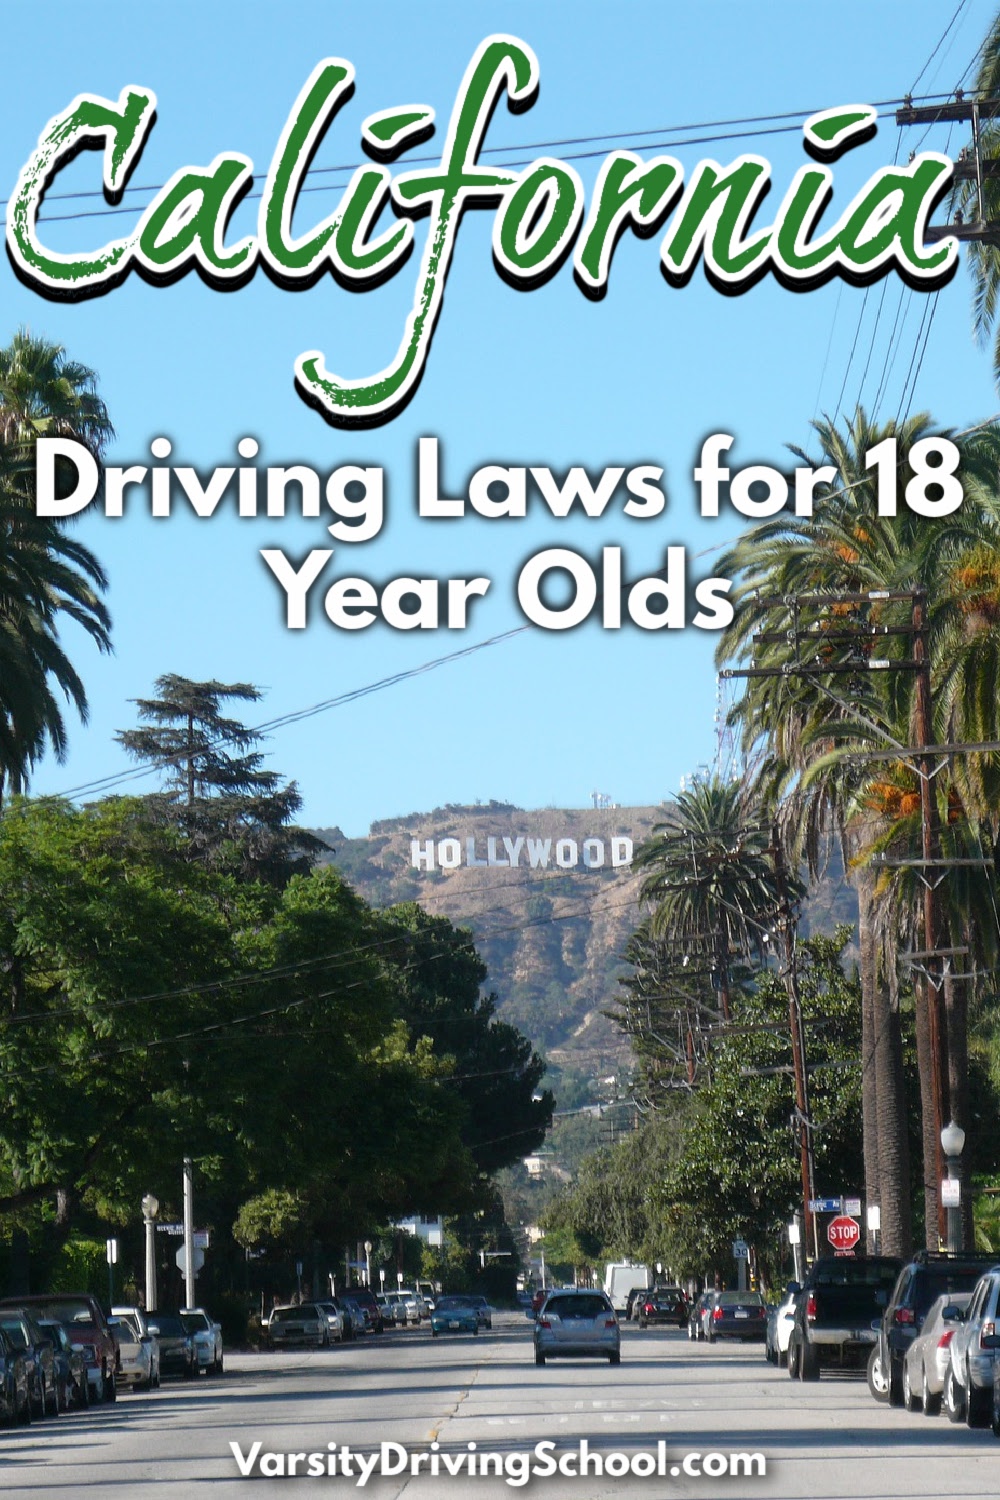 Many of the California driving rules for 18 year olds give a new sense of freedom and responsibility to teens and parents alike.